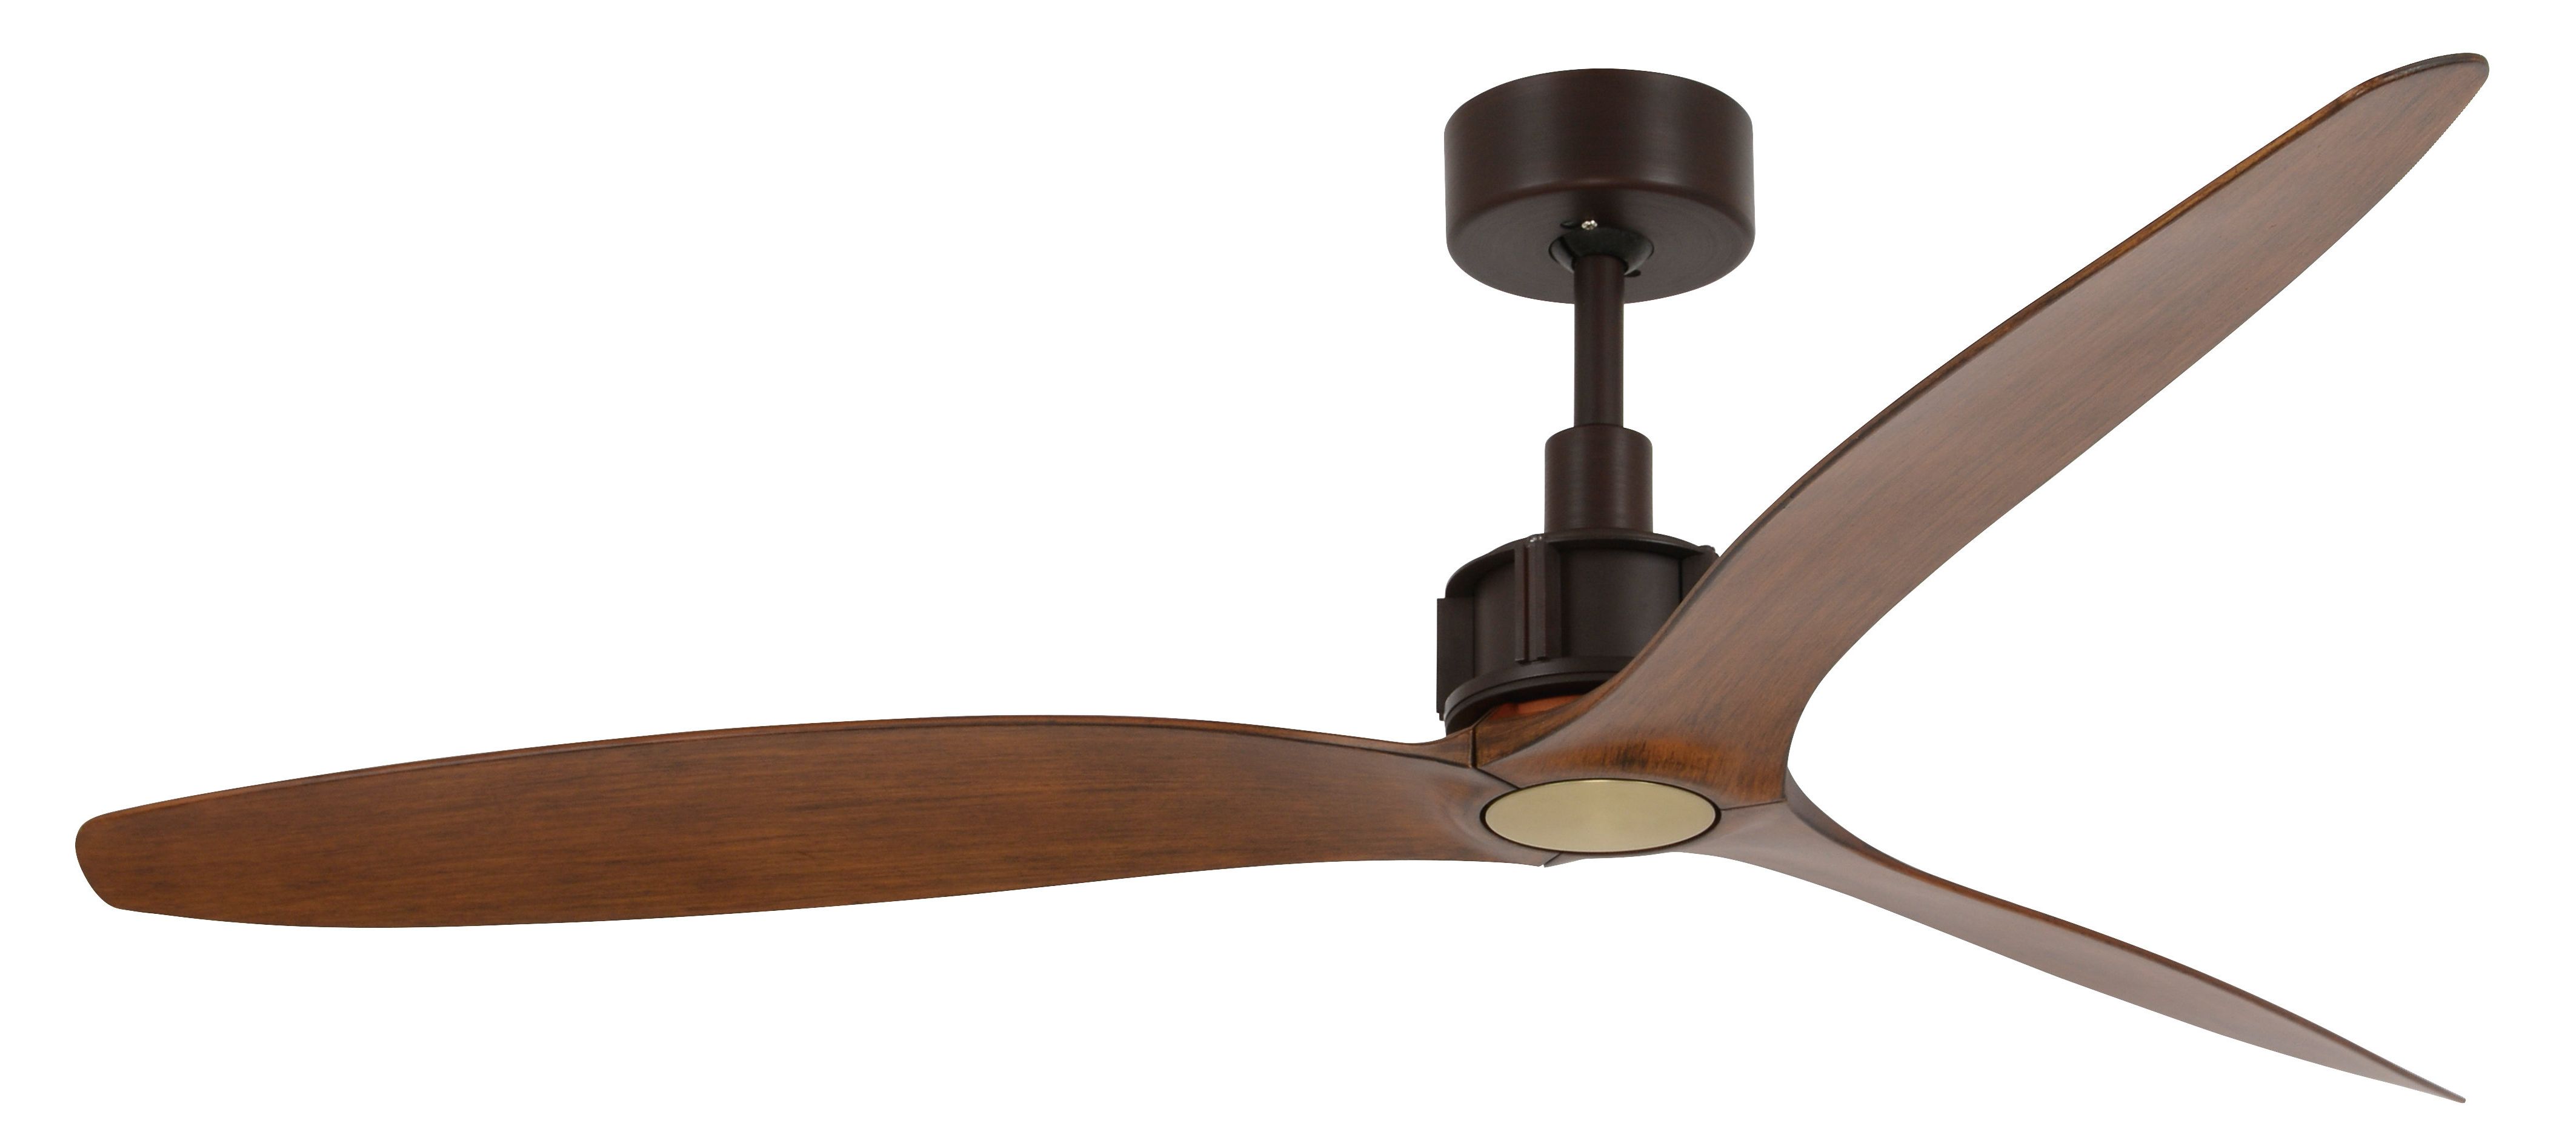 Tyree 3 Blade Ceiling Fans In Well Known Modern Rustic Interiors Theron 52" Catoe 3 Blade Ceiling Fan With Remote (View 7 of 20)